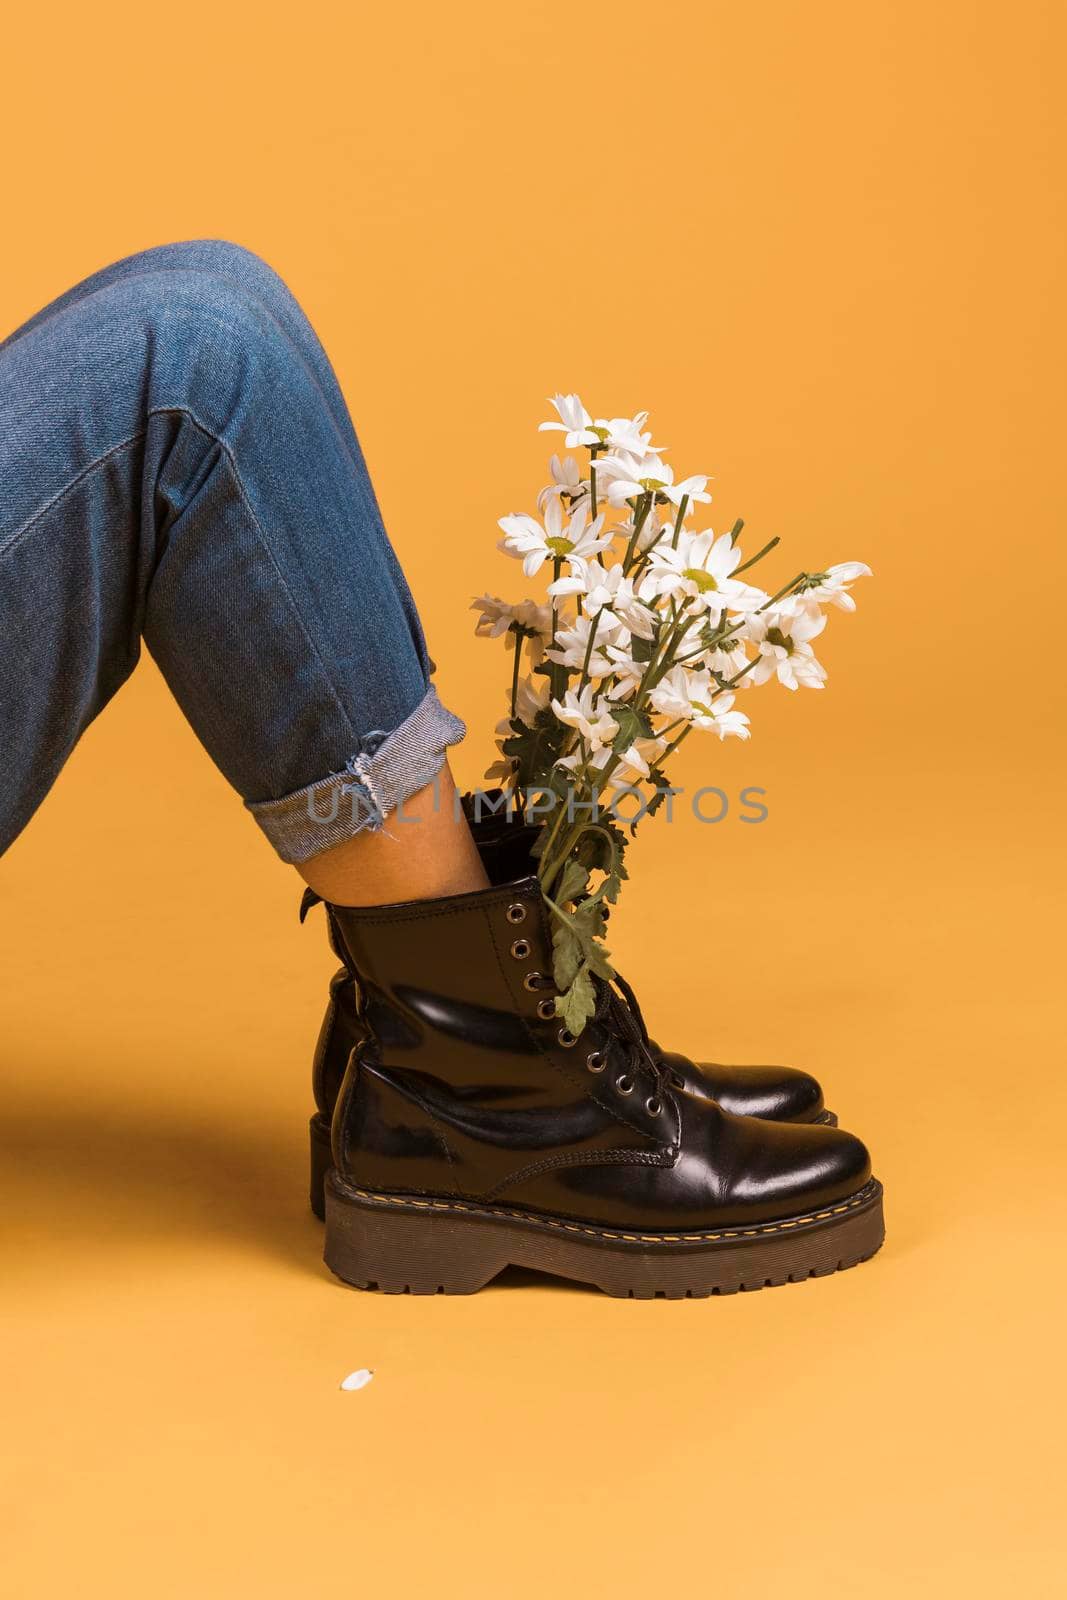 sitting female legs boots with flowers inside. High resolution photo